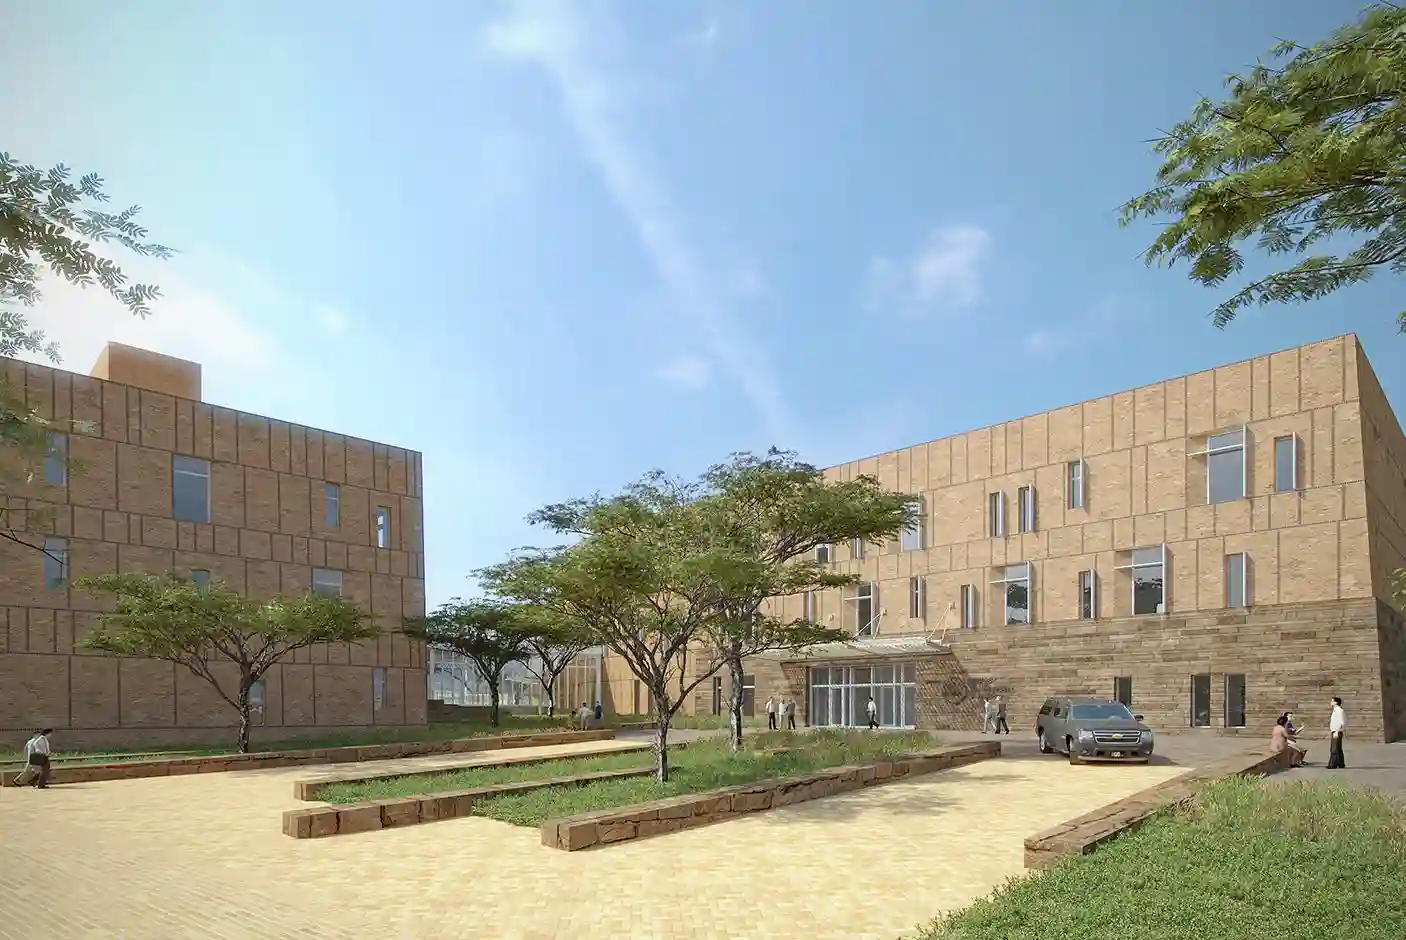 WATCH: The Official Opening Of The US Embassy In Harare